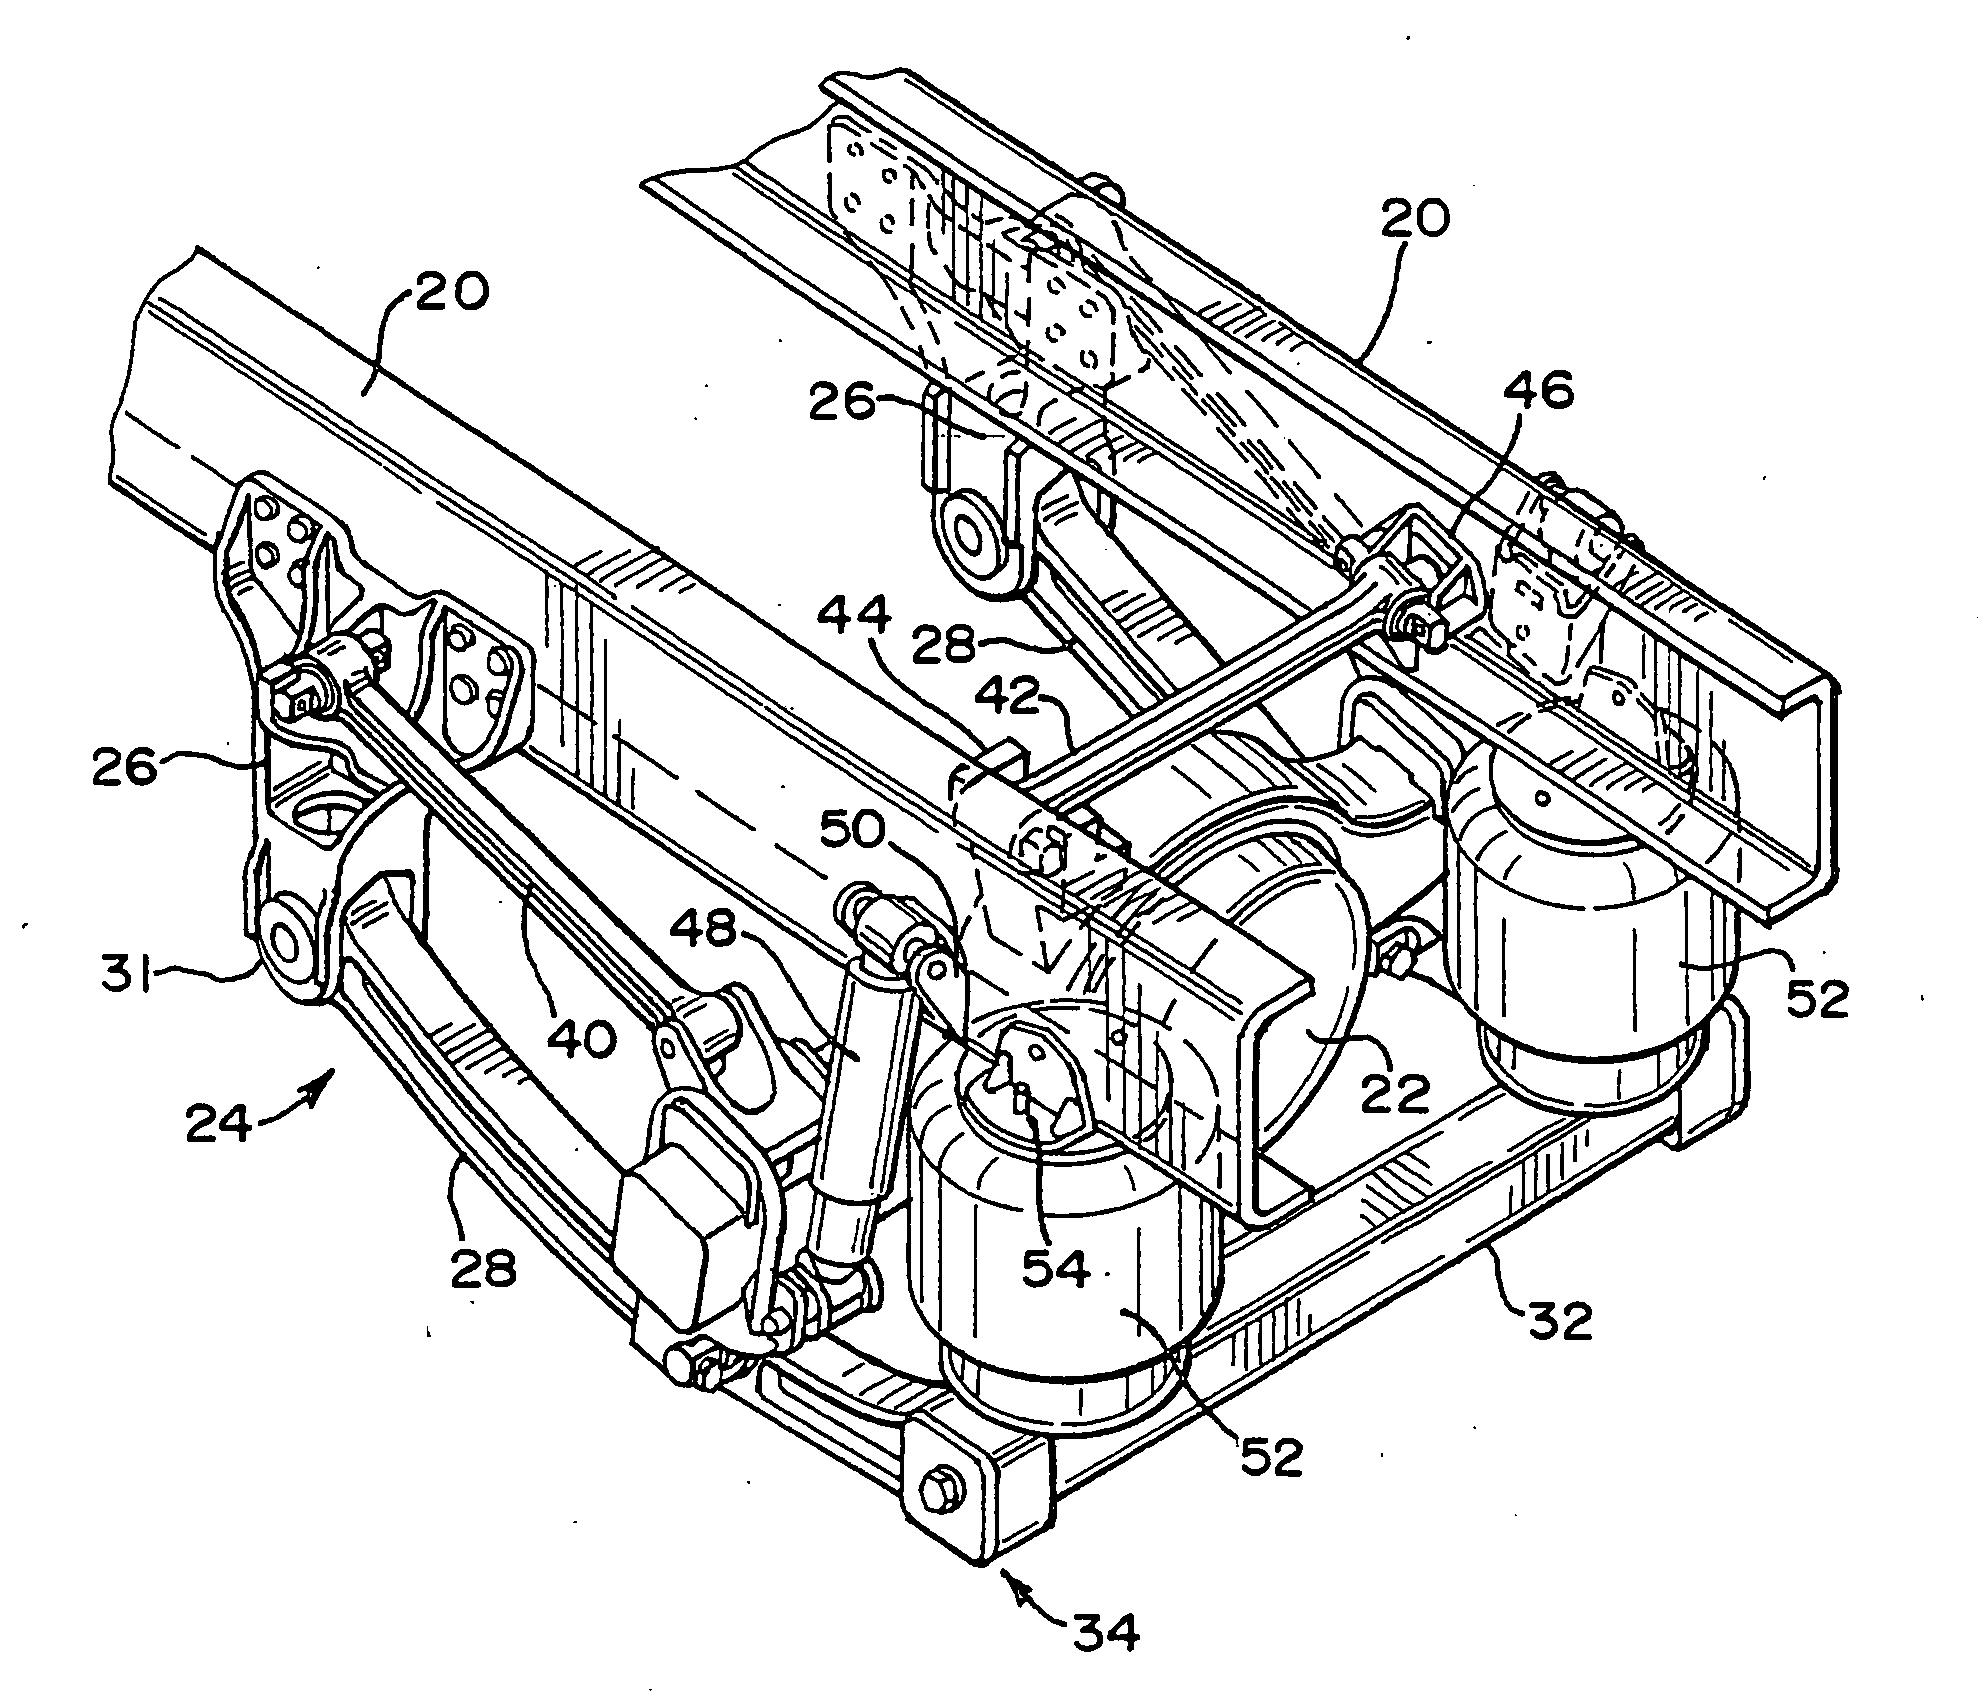 Axle clamp assembly top pad and suspensions incorporating same